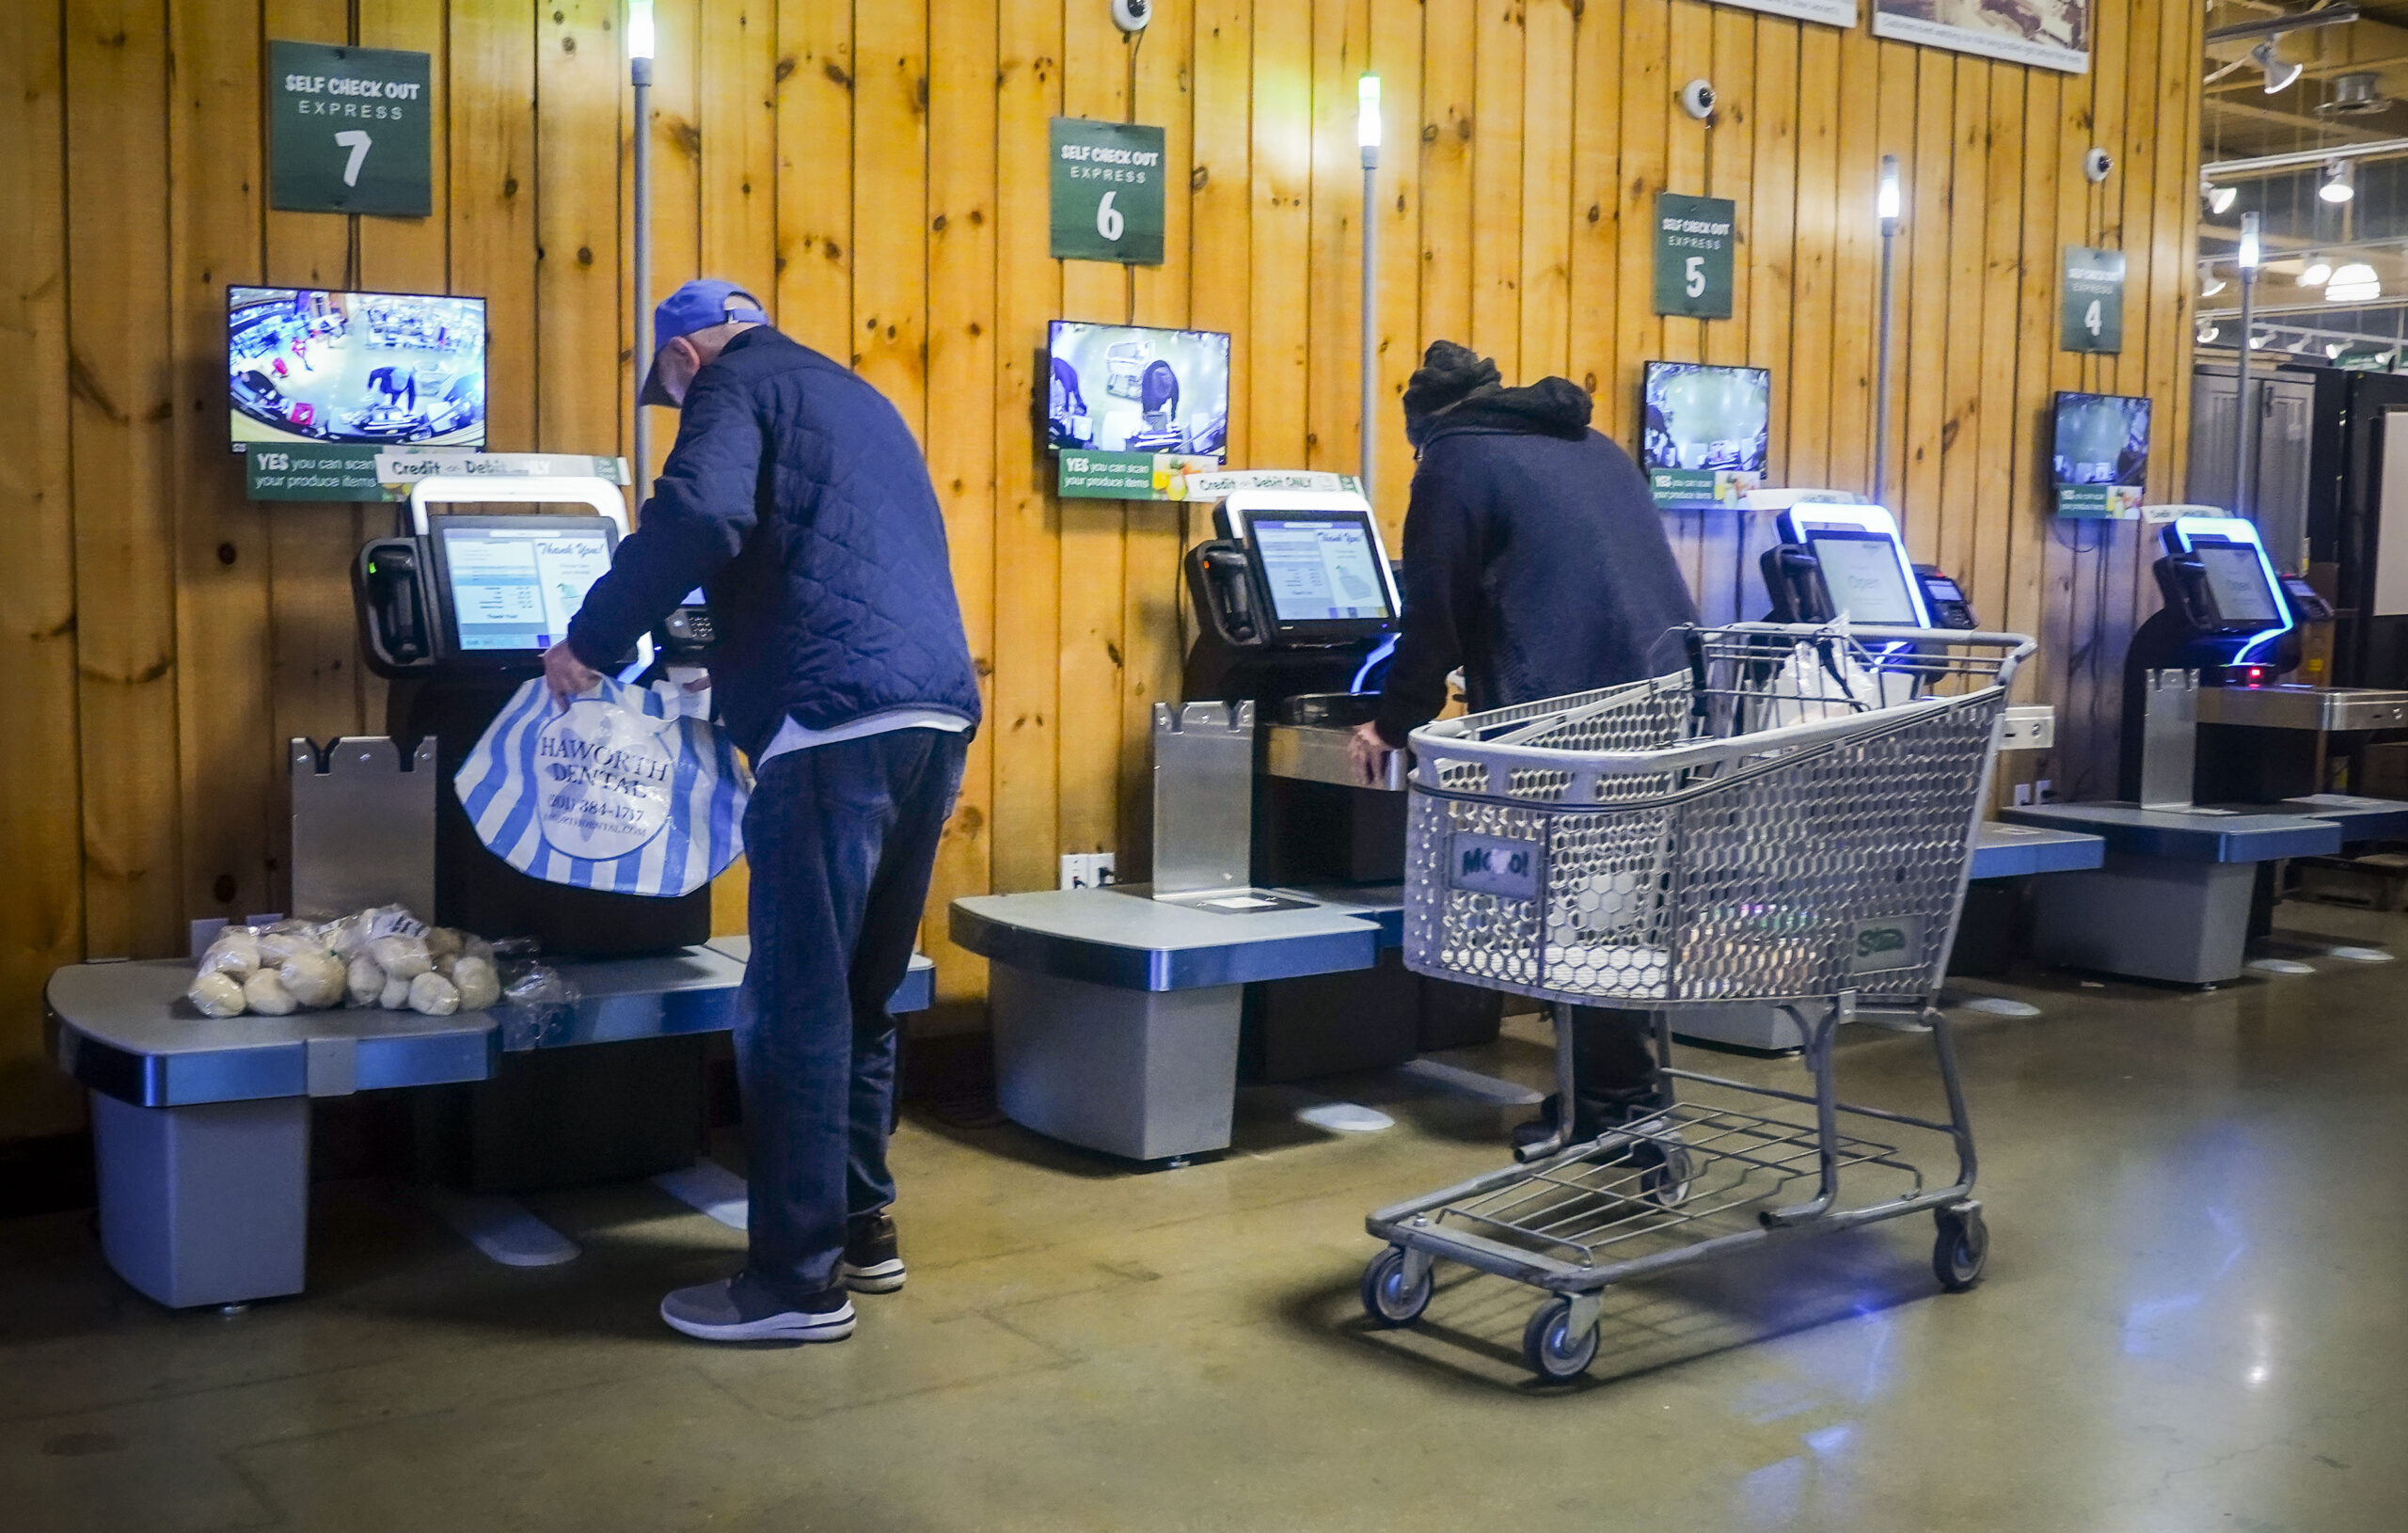 Customers use self-checkout kiosks at Stew Leonard's grocery store in Paramus, N.J., Wednesday, Dec...